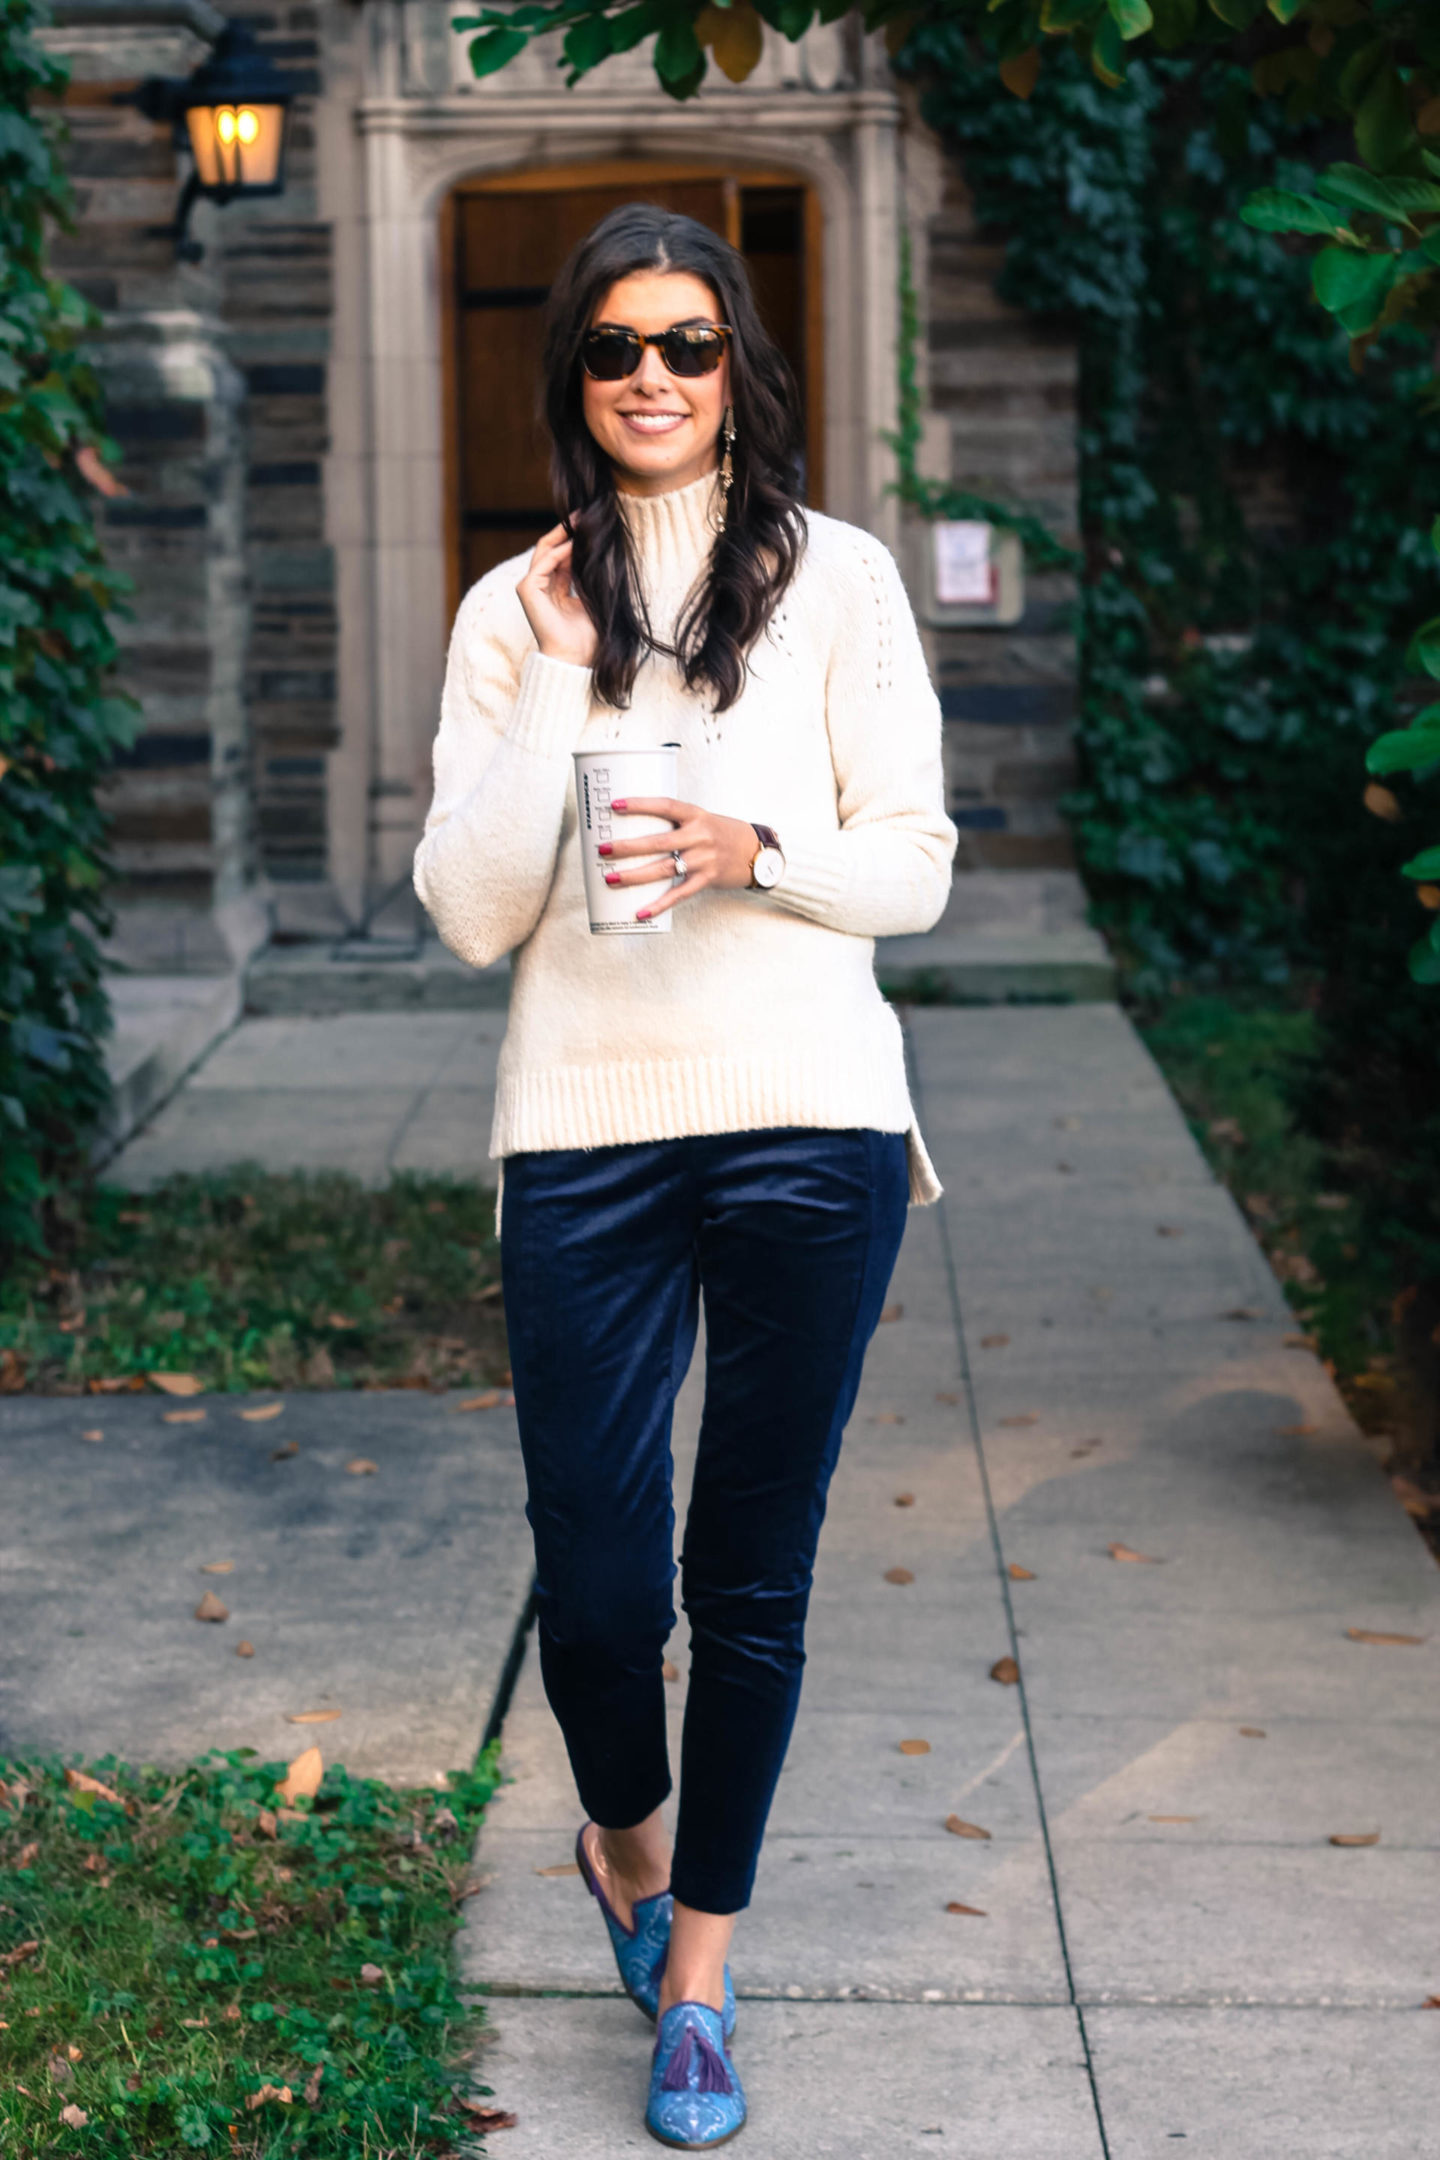 Velvet Pants With Banana Republic - Velvet Pants And A Cozy Sweater With Banana Republic by New York fashion blogger Style Waltz